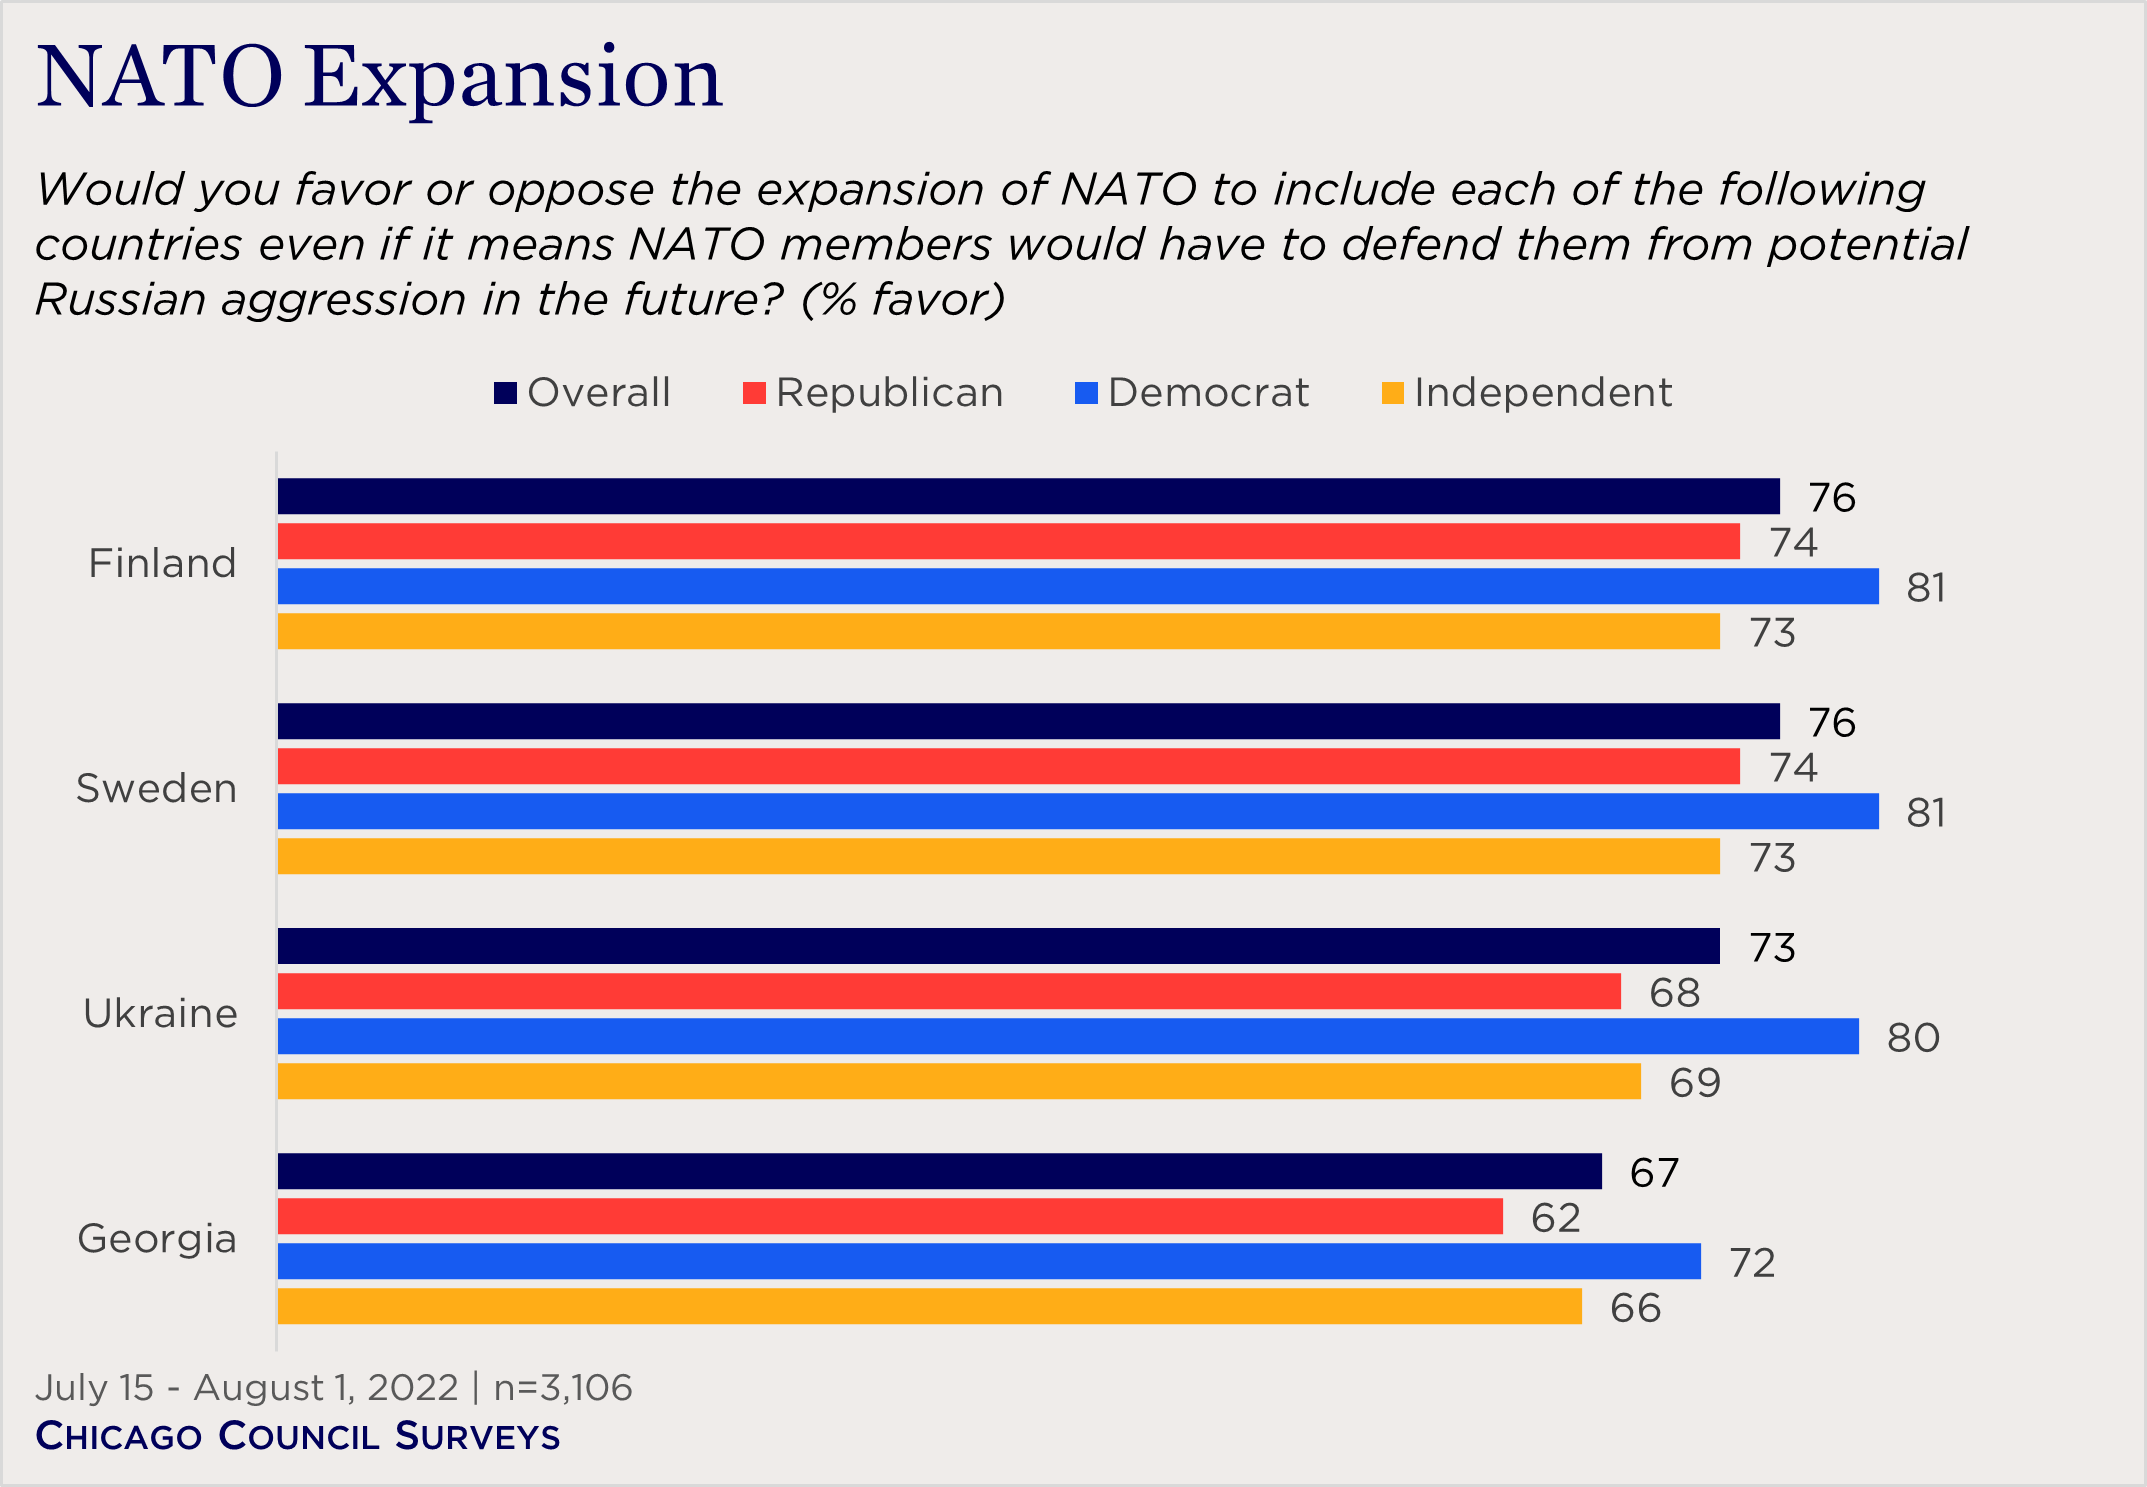 "bar chart showing partisan views on NATO expansion"